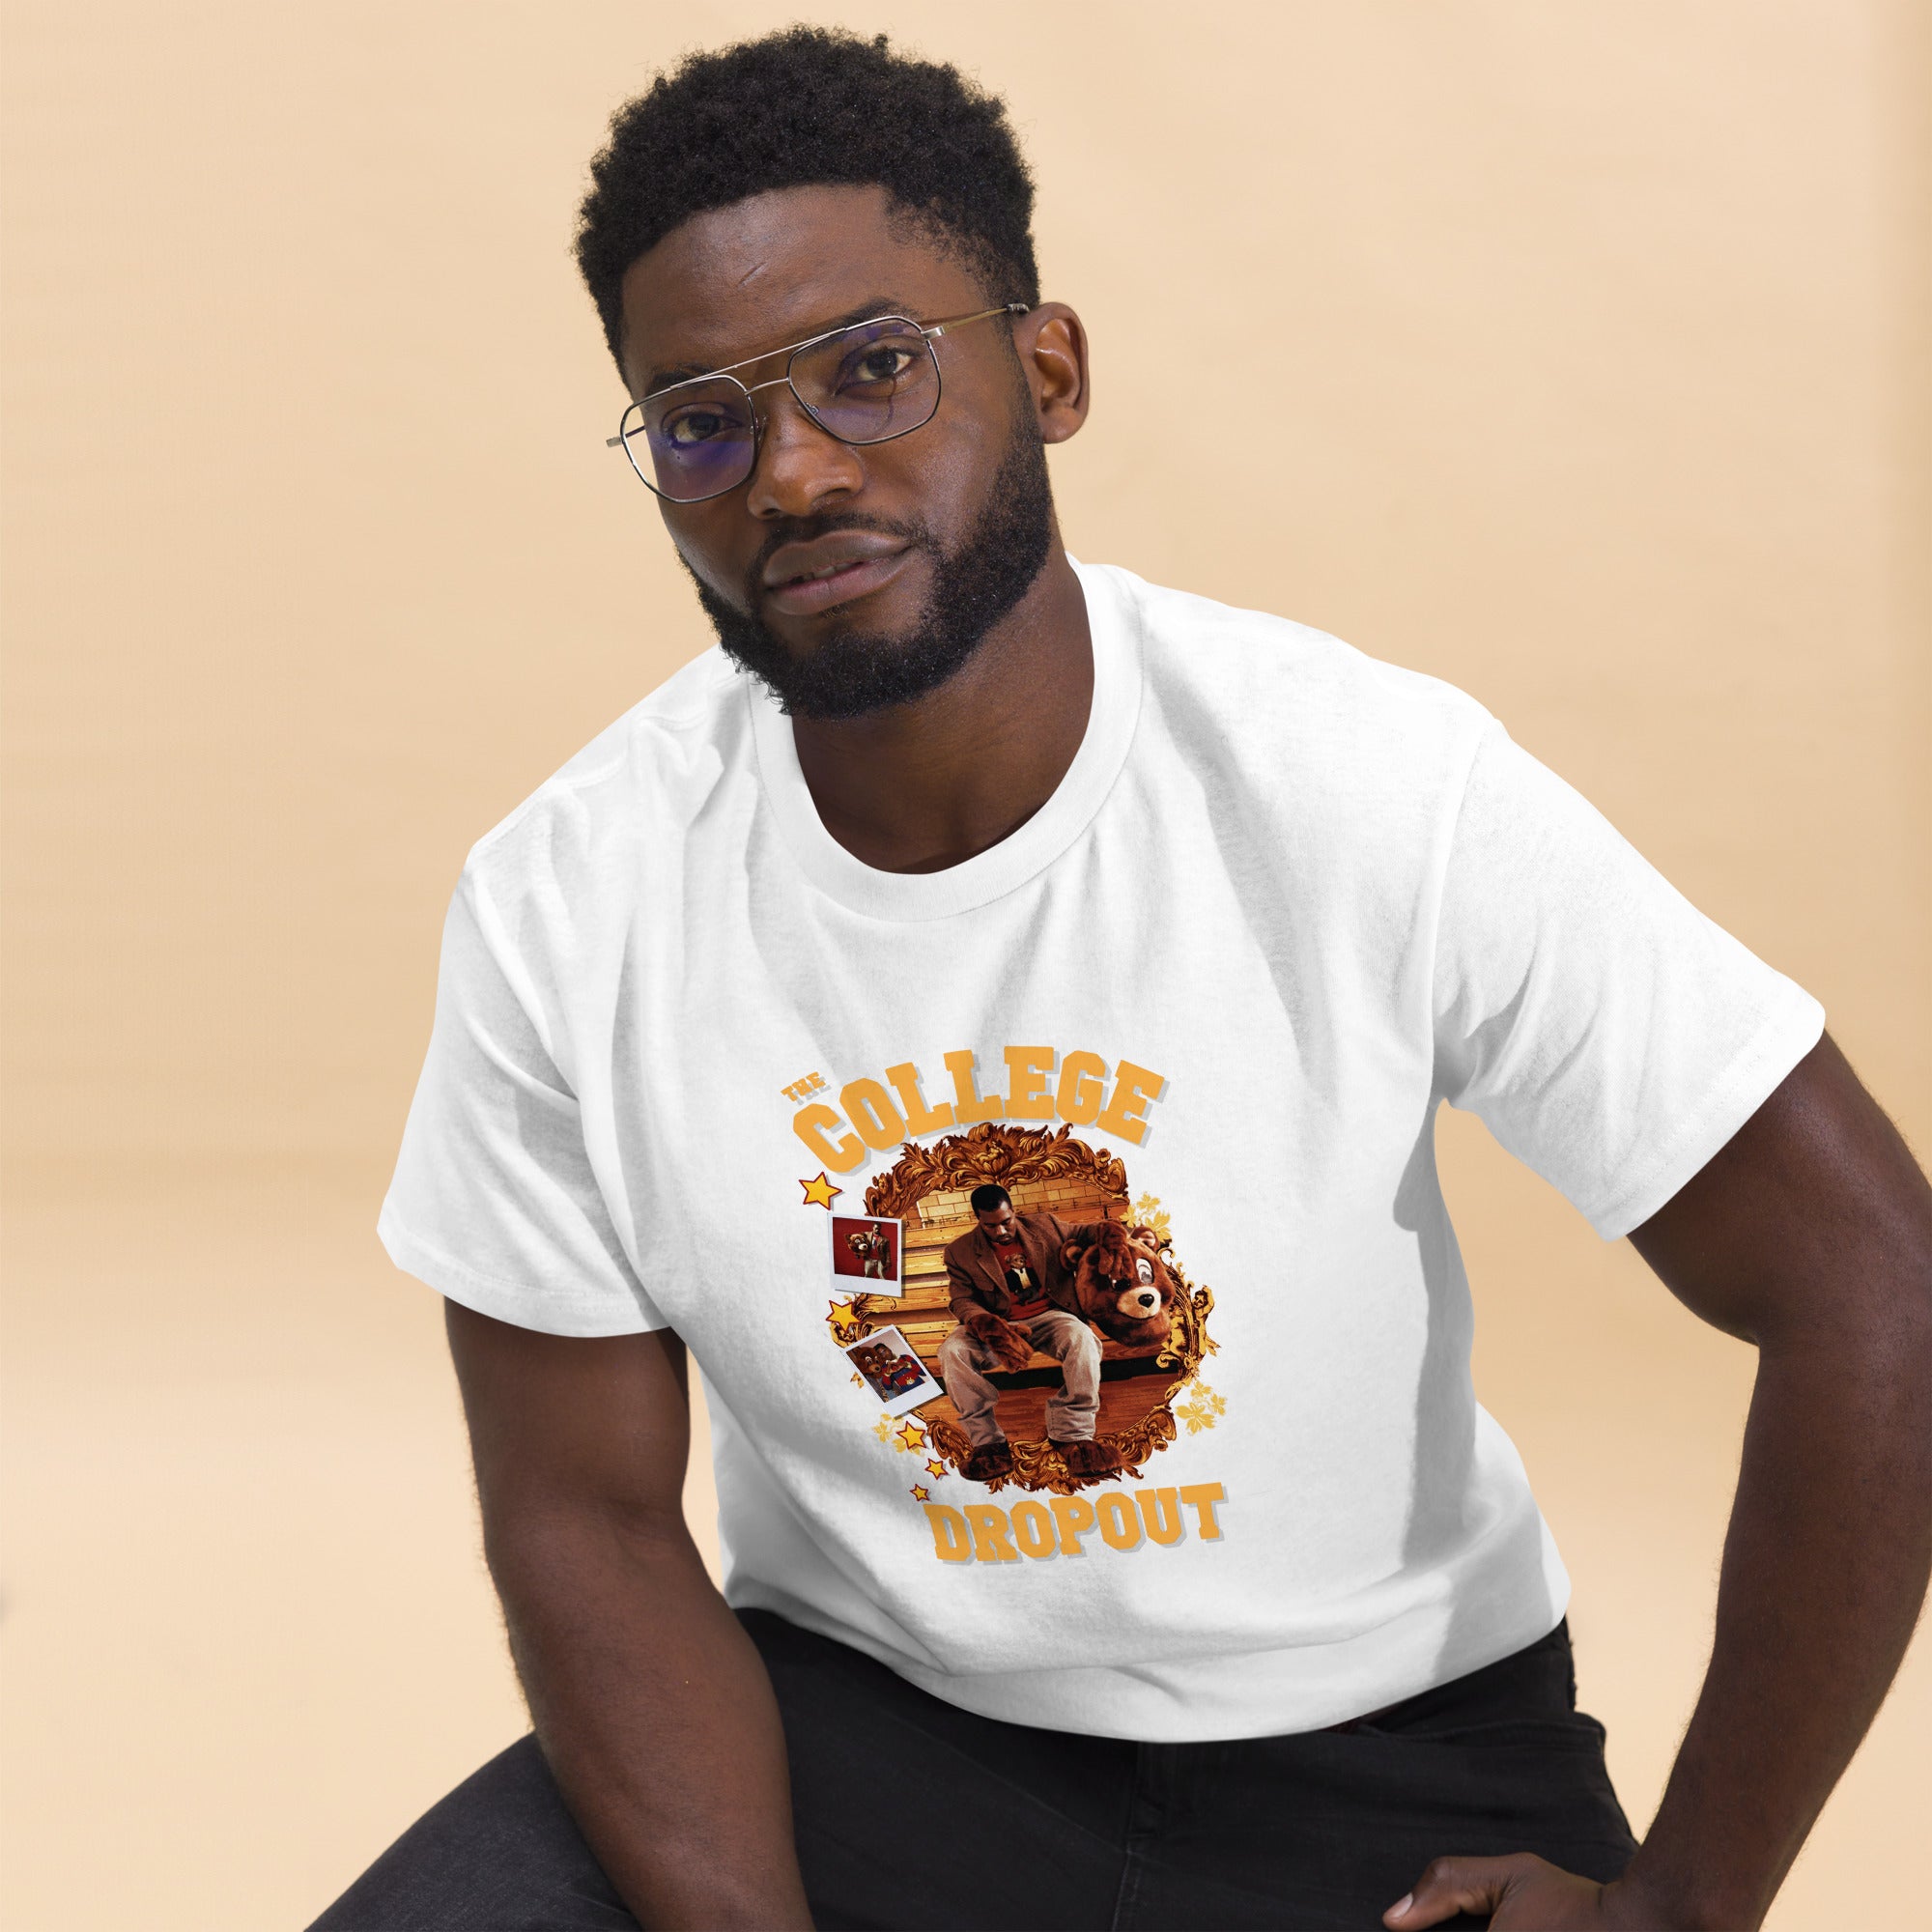 College Dropout Tee